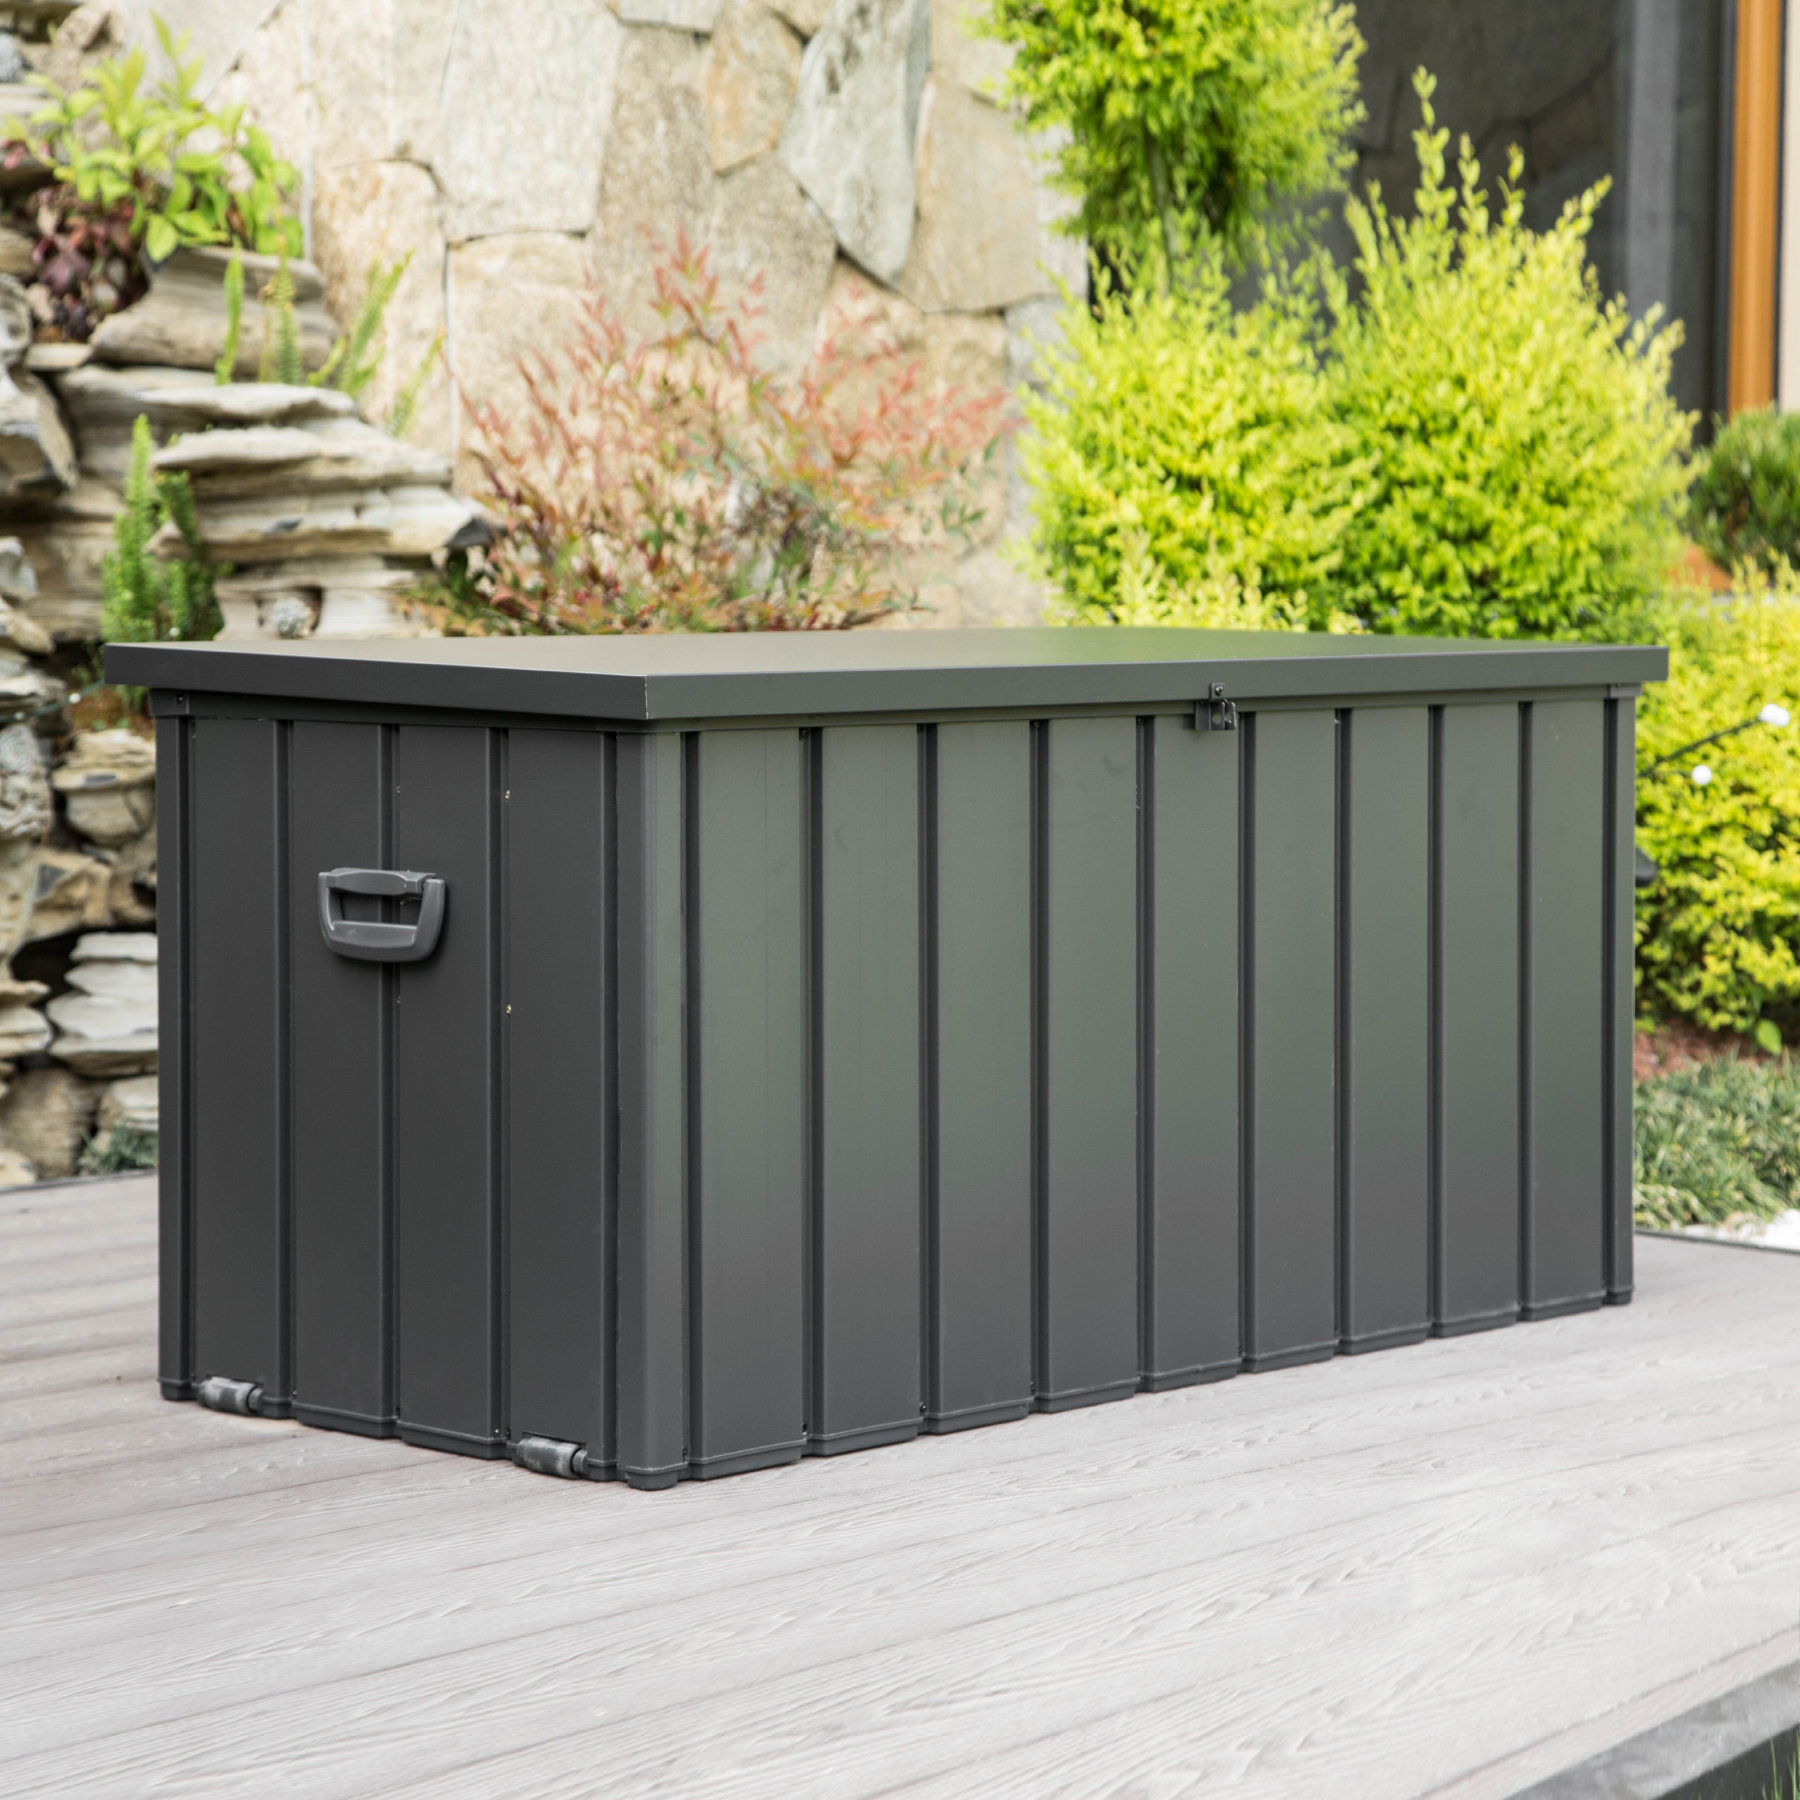 Rubbermaid Outdoor Extra-Large Deck Box with Seat, Gray & Brown